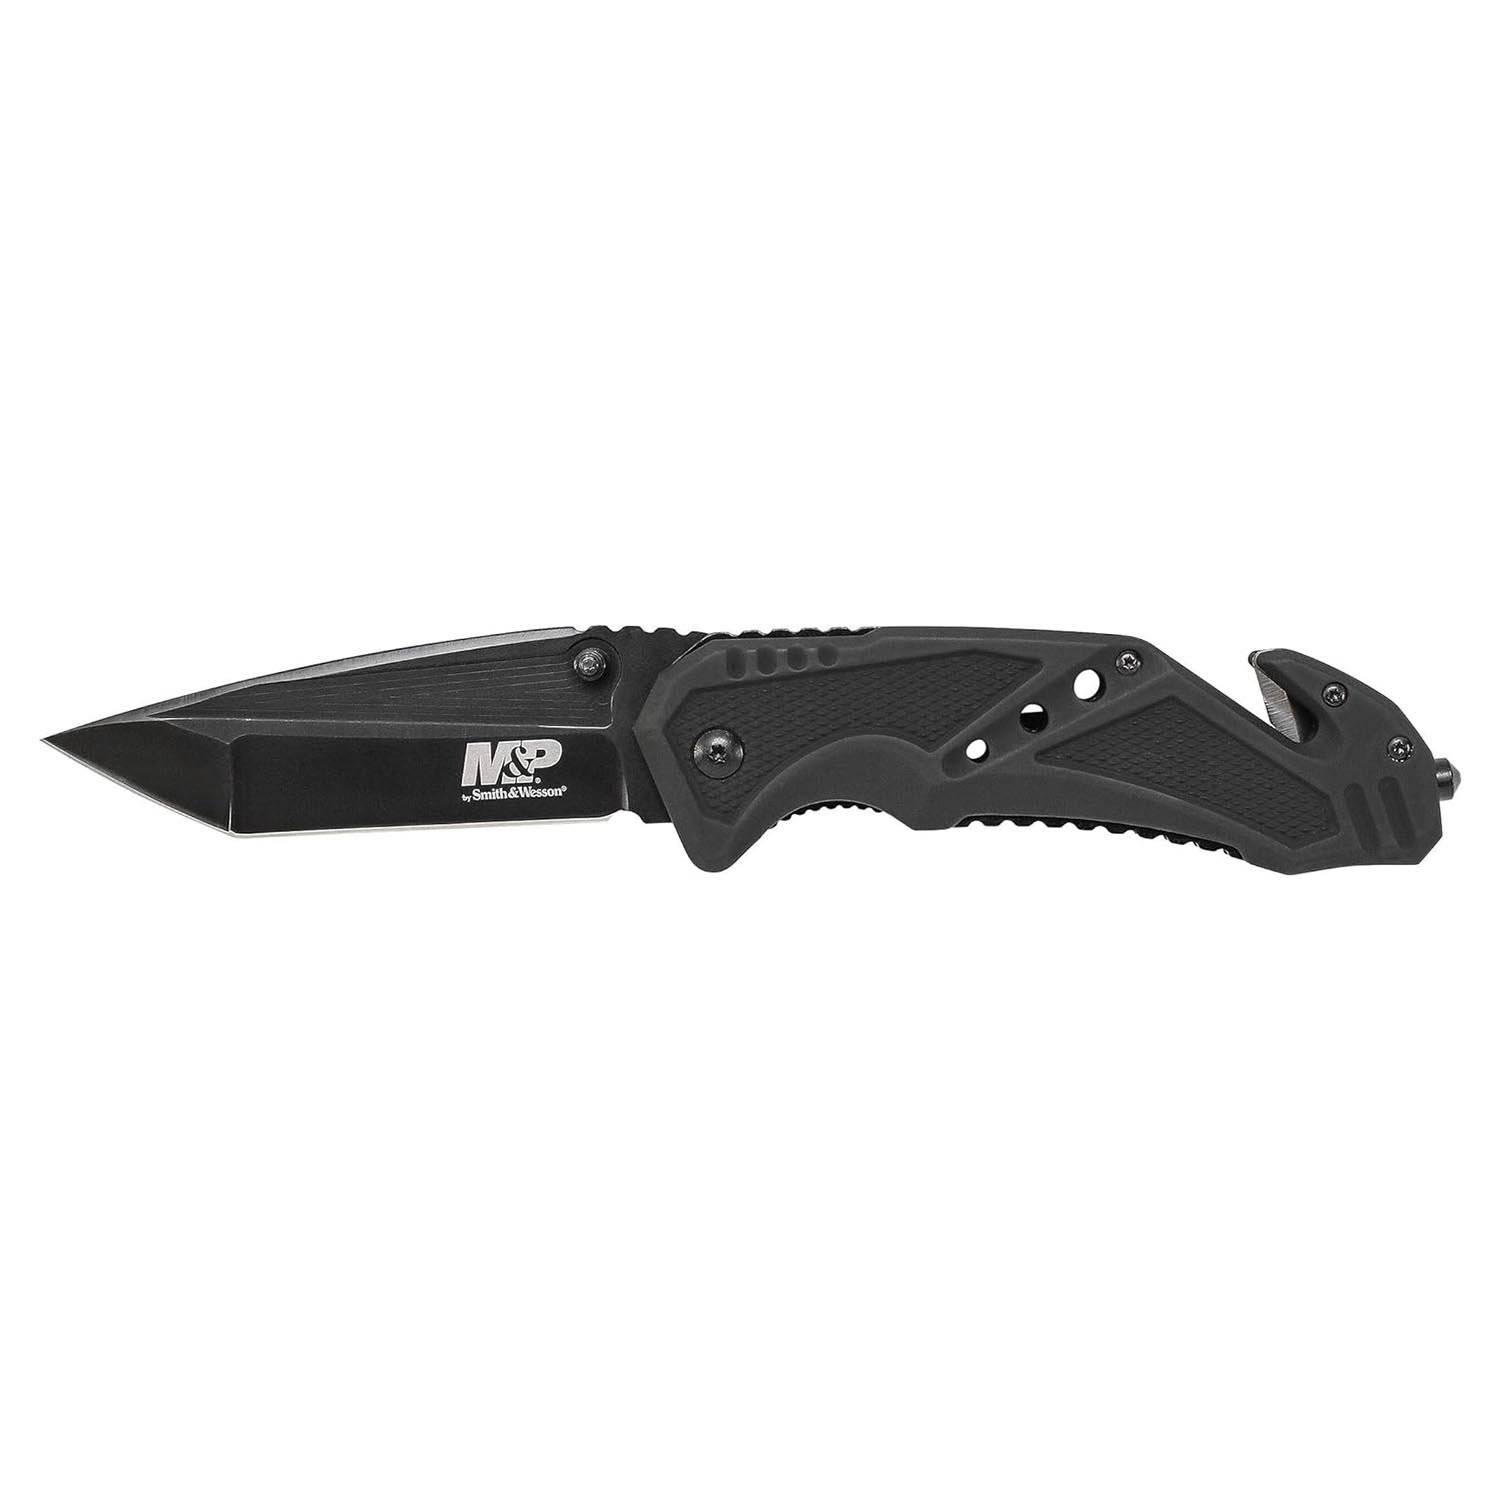 Smith & Wesson M&P Tanto Folding Rescue Knife